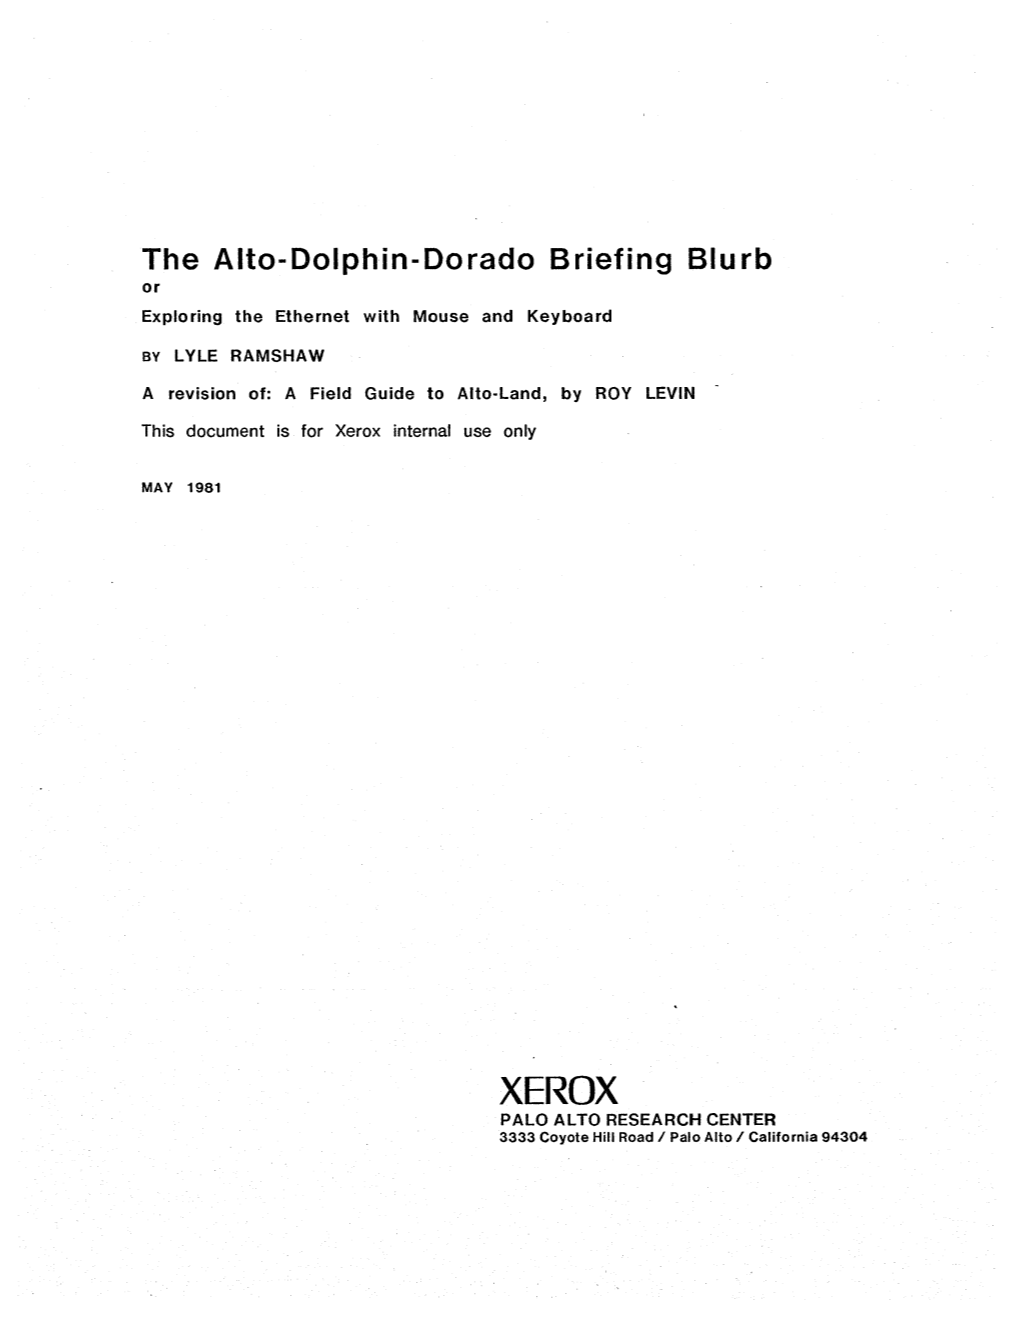 The Alto-Dolphin-Dorado Briefing Blurb Or Exploring the Ethernet with Mouse and Keyboard